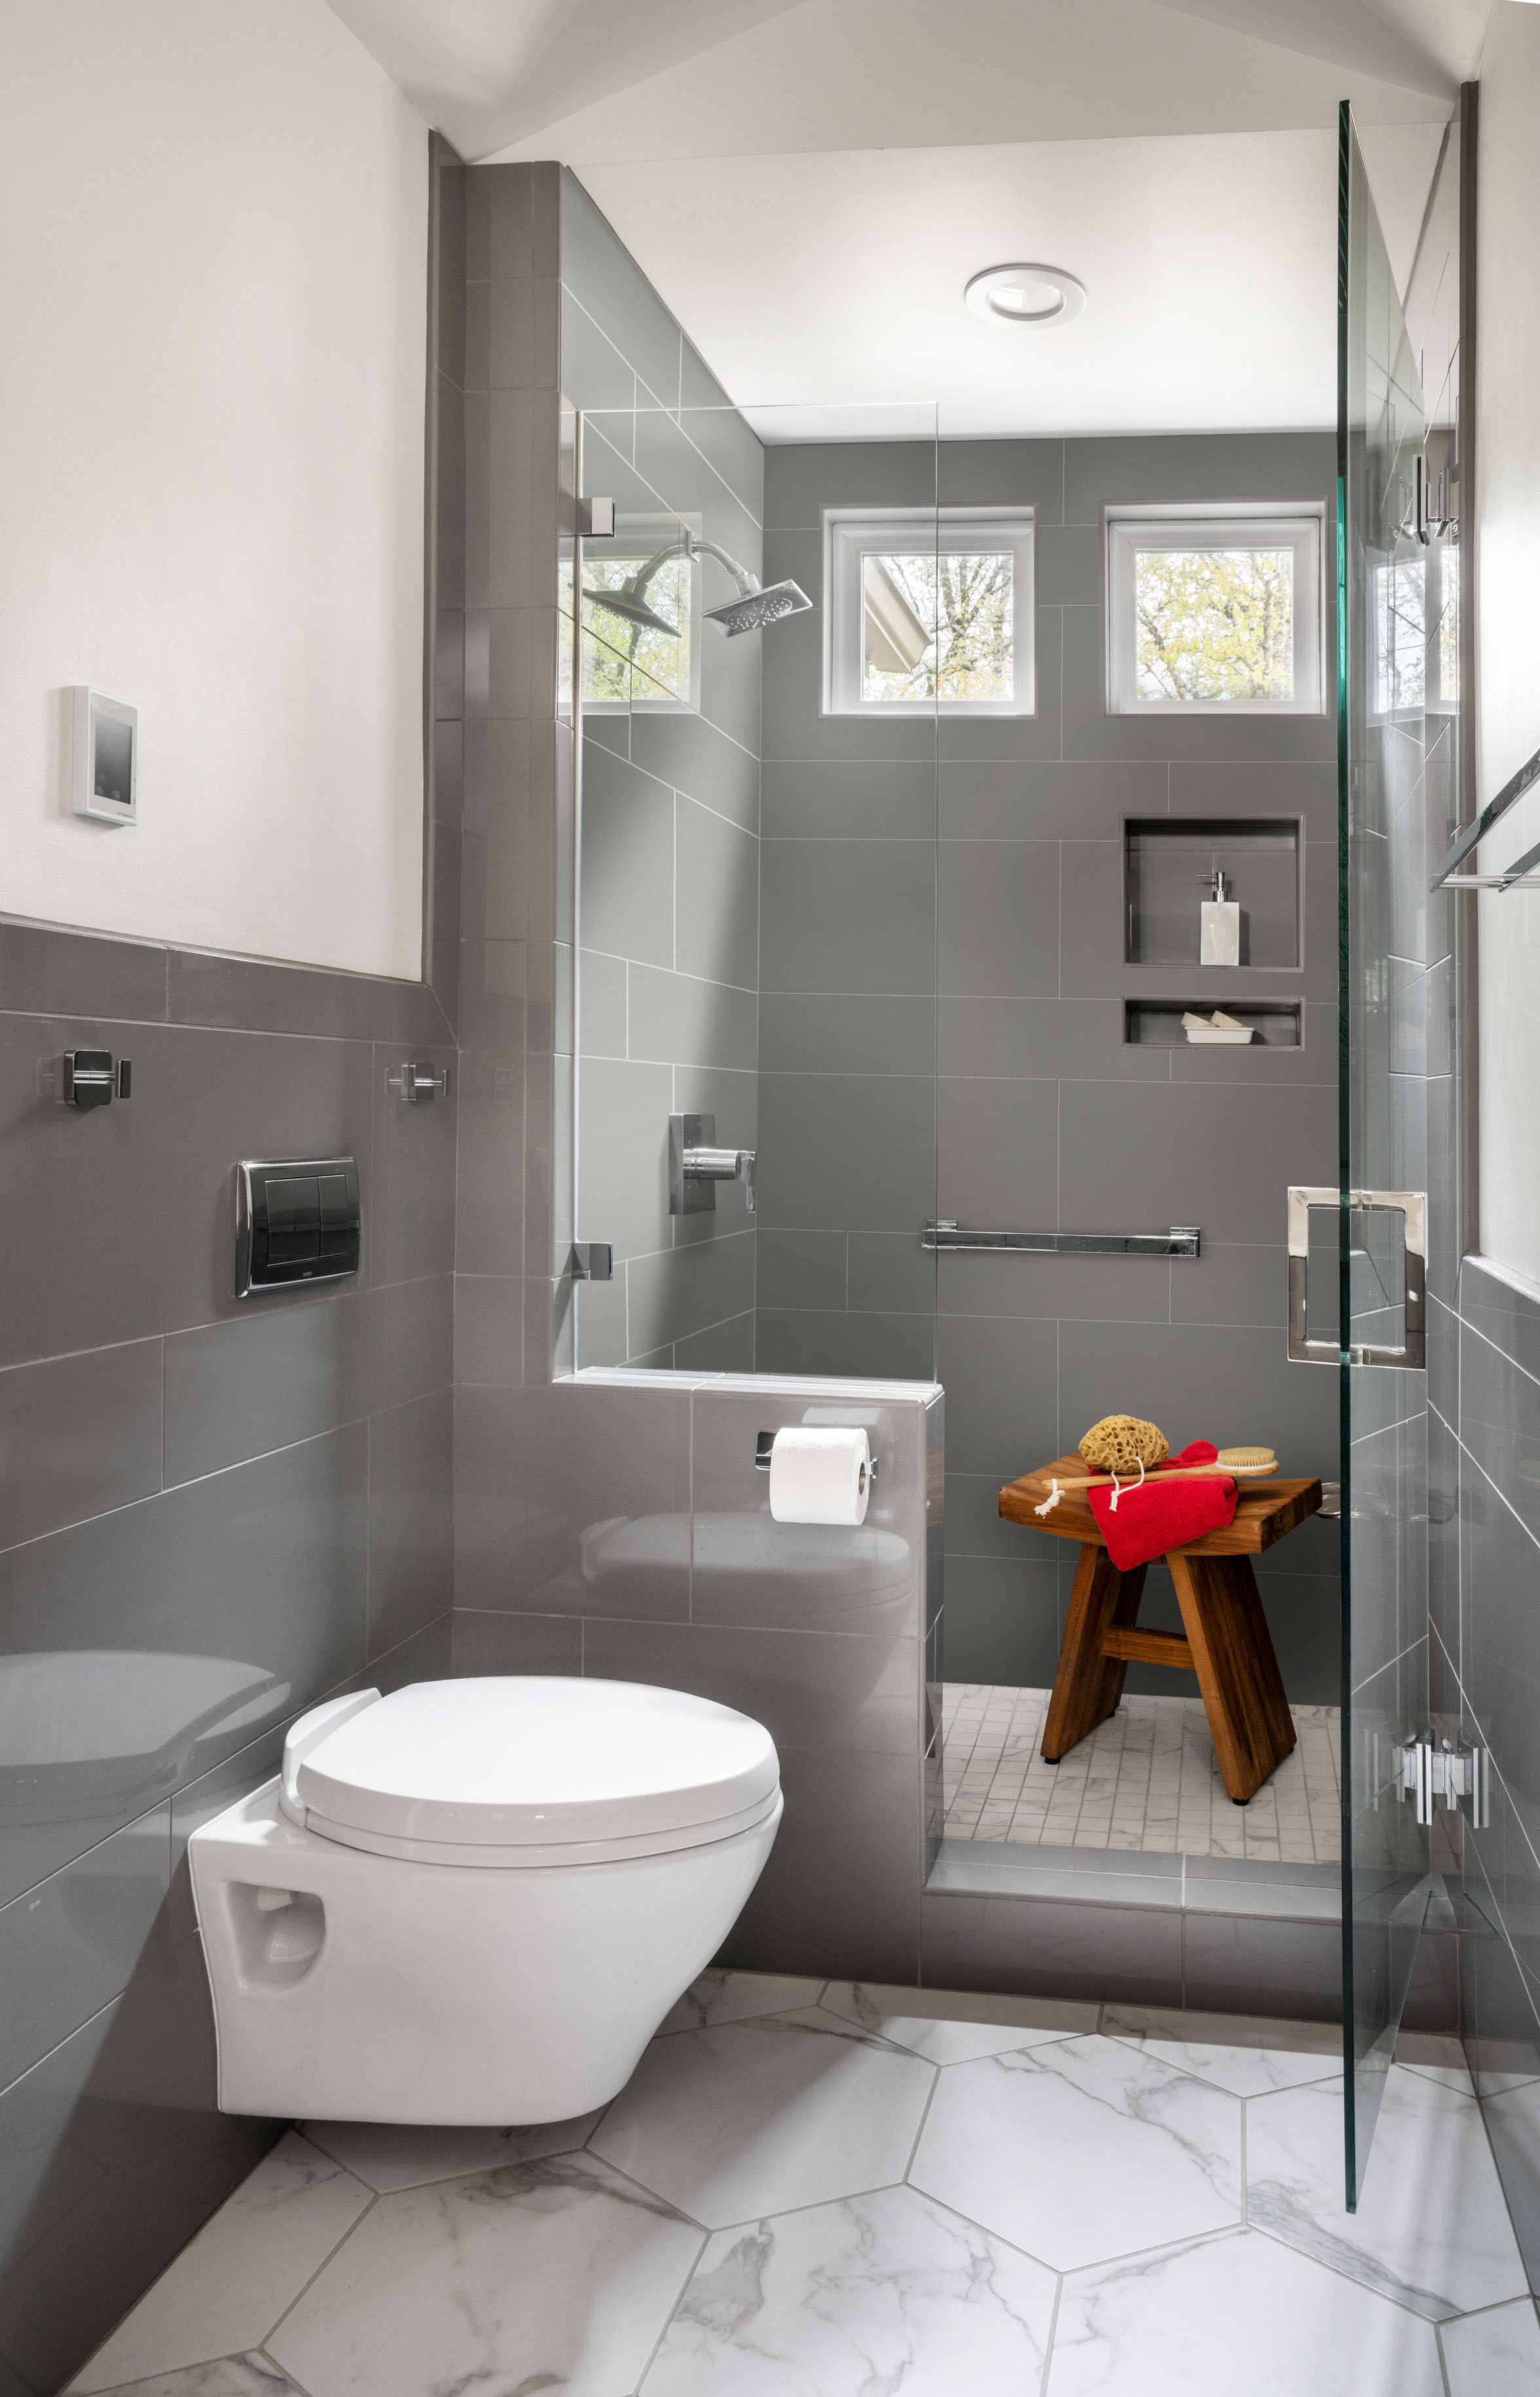 The wall mounted toilet creates extra space to access the shower. 